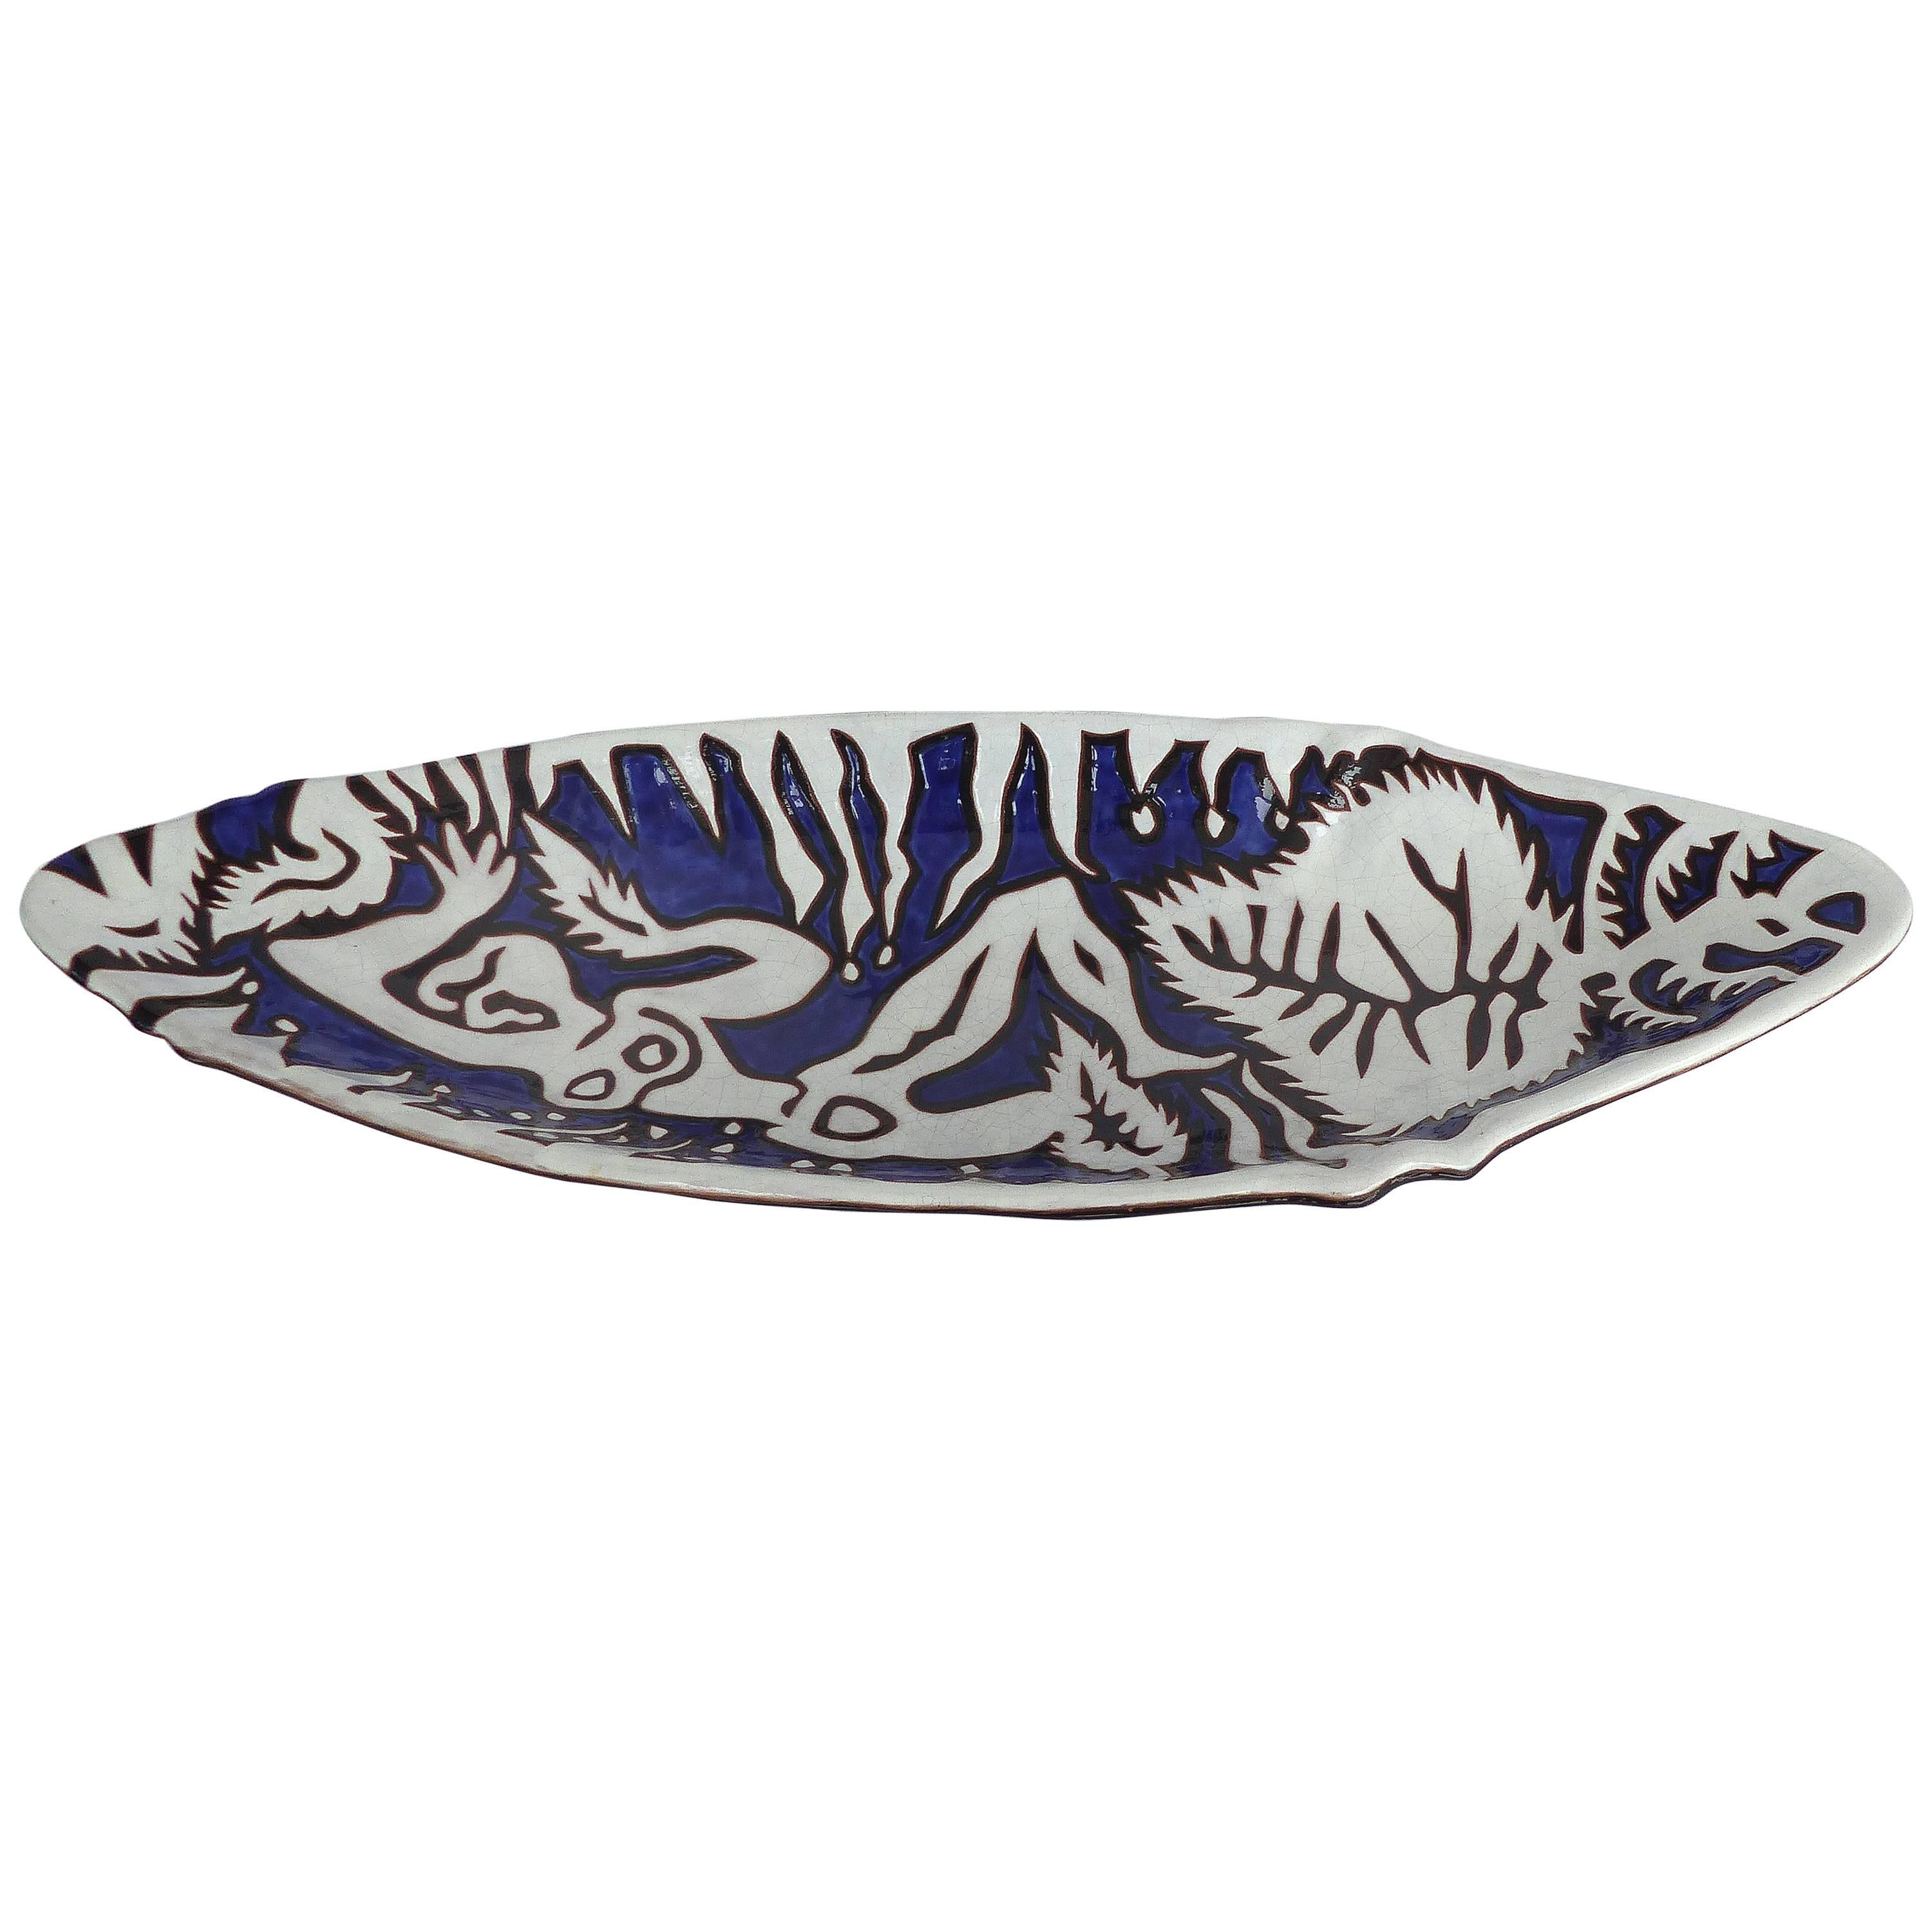 Jean Lurçat Eliptical Shaped Footed Ceramic Tray with Abstract Nude Figure